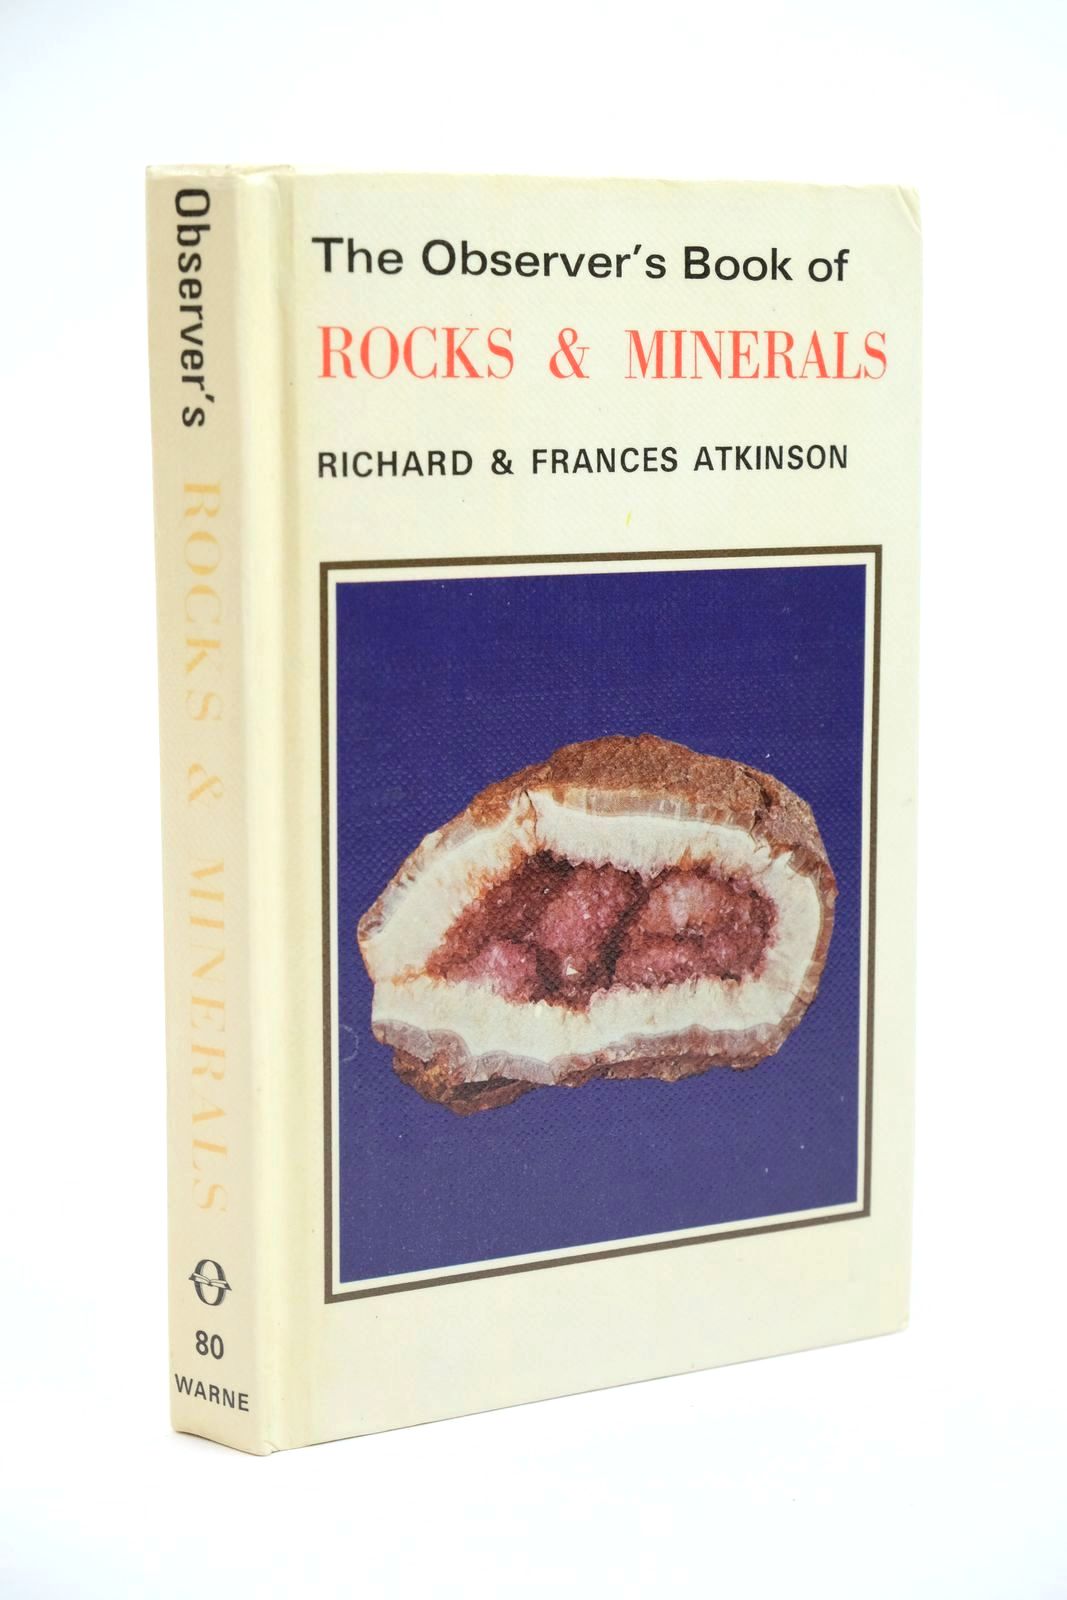 Photo of THE OBSERVER'S BOOK OF ROCKS AND MINERALS written by Atkinson, Frances
Atkinson, Richard published by Frederick Warne (Publishers) Ltd. (STOCK CODE: 1323226)  for sale by Stella & Rose's Books